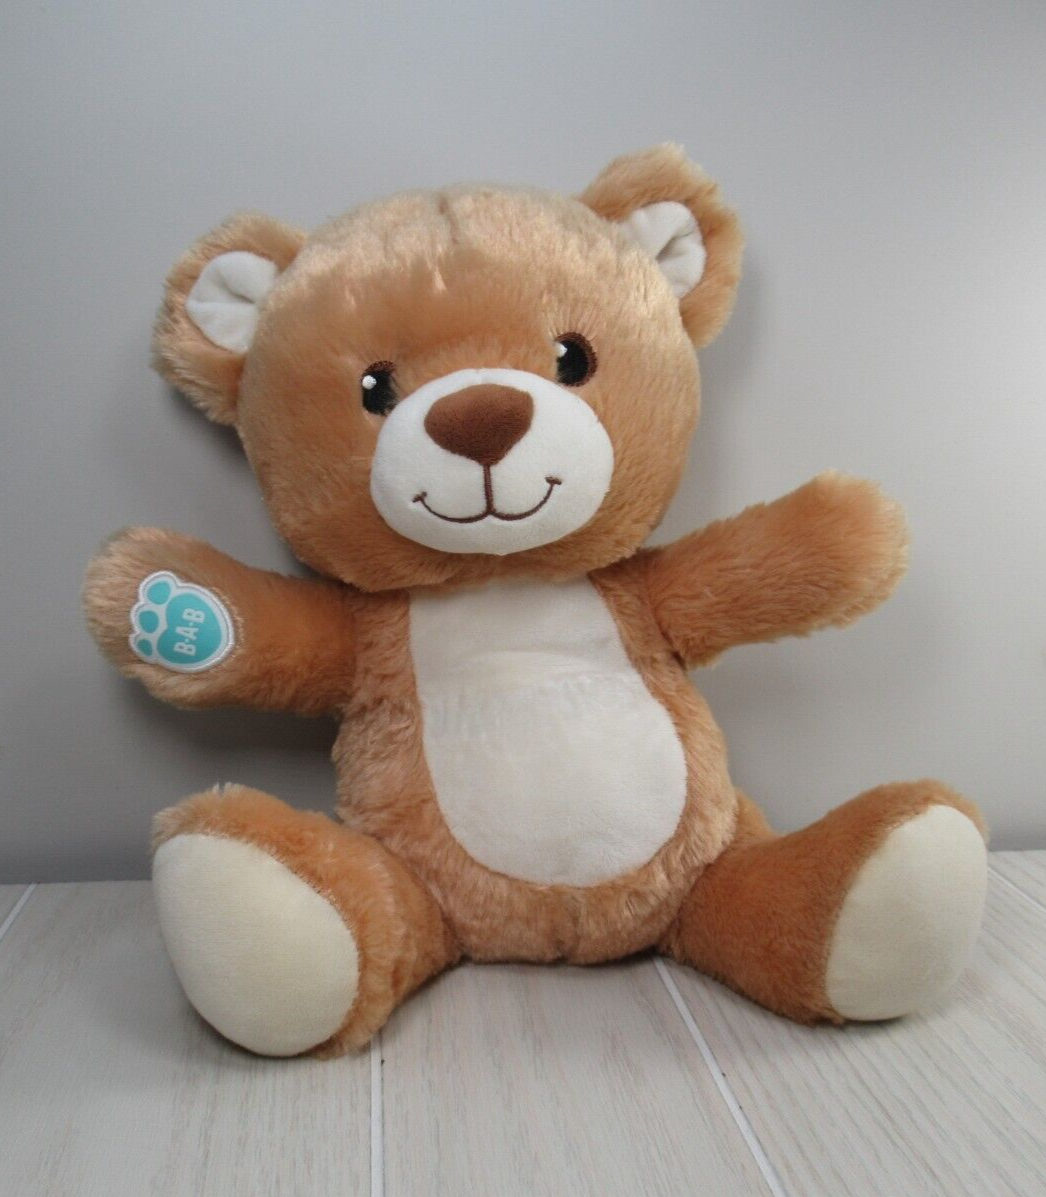 Primary image for Build a Bear Plush teddy Tan brown cream  beige blue BAB pawprint stitched eyes